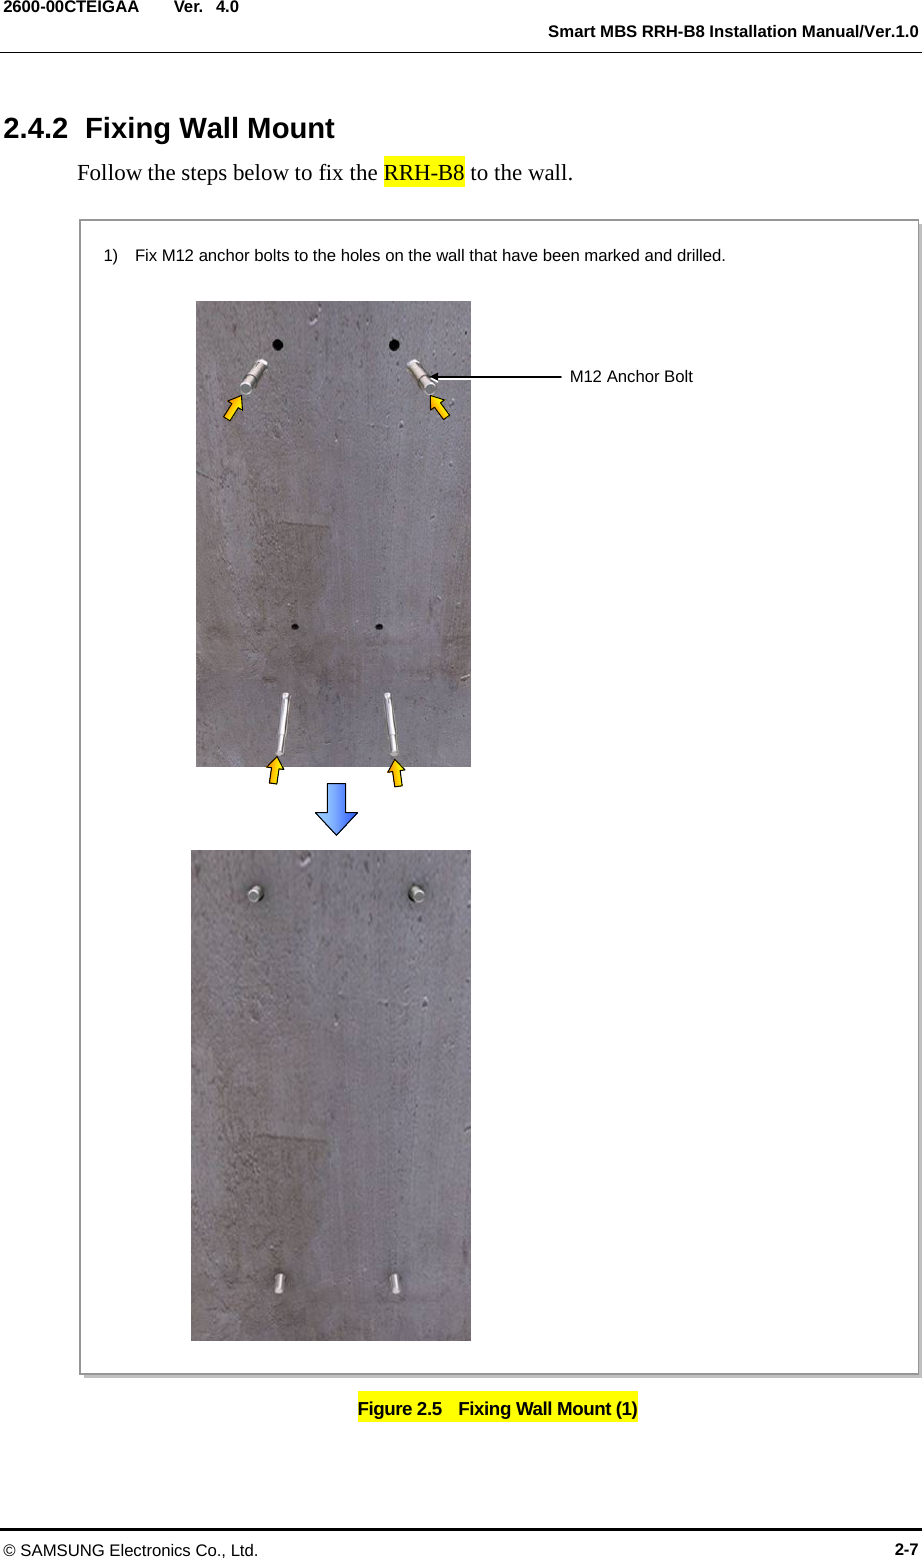  Ver.   Smart MBS RRH-B8 Installation Manual/Ver.1.0 2600-00CTEIGAA 4.0 2.4.2  Fixing Wall Mount Follow the steps below to fix the RRH-B8 to the wall.  Figure 2.5   Fixing Wall Mount (1) 1)    Fix M12 anchor bolts to the holes on the wall that have been marked and drilled.  M12 Anchor Bolt © SAMSUNG Electronics Co., Ltd. 2-7 